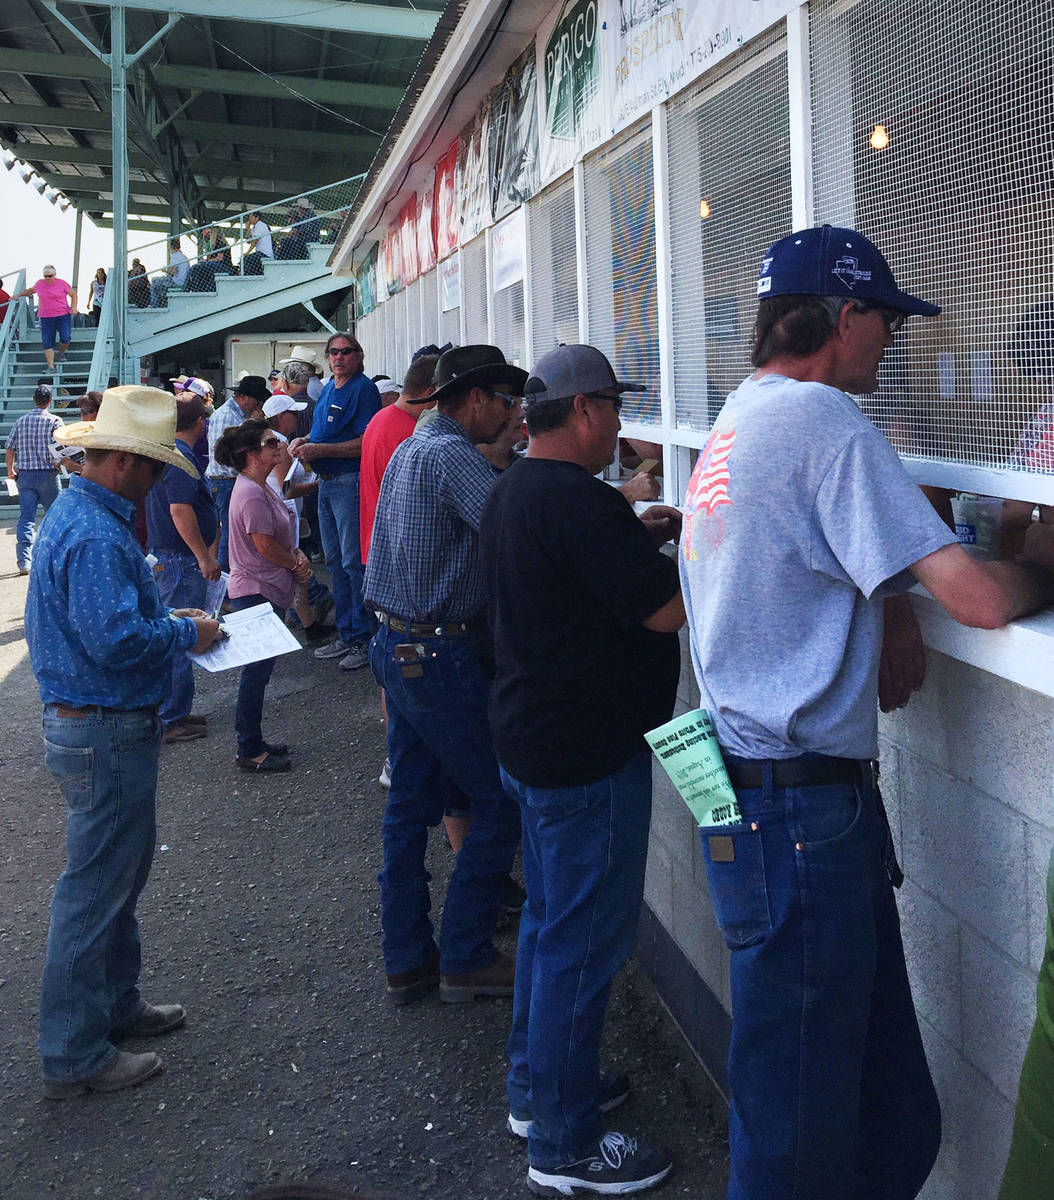 Fans place their bets at the White Pine Races in Ely. (Mike Brunker/Las Vegas Review-Journal)